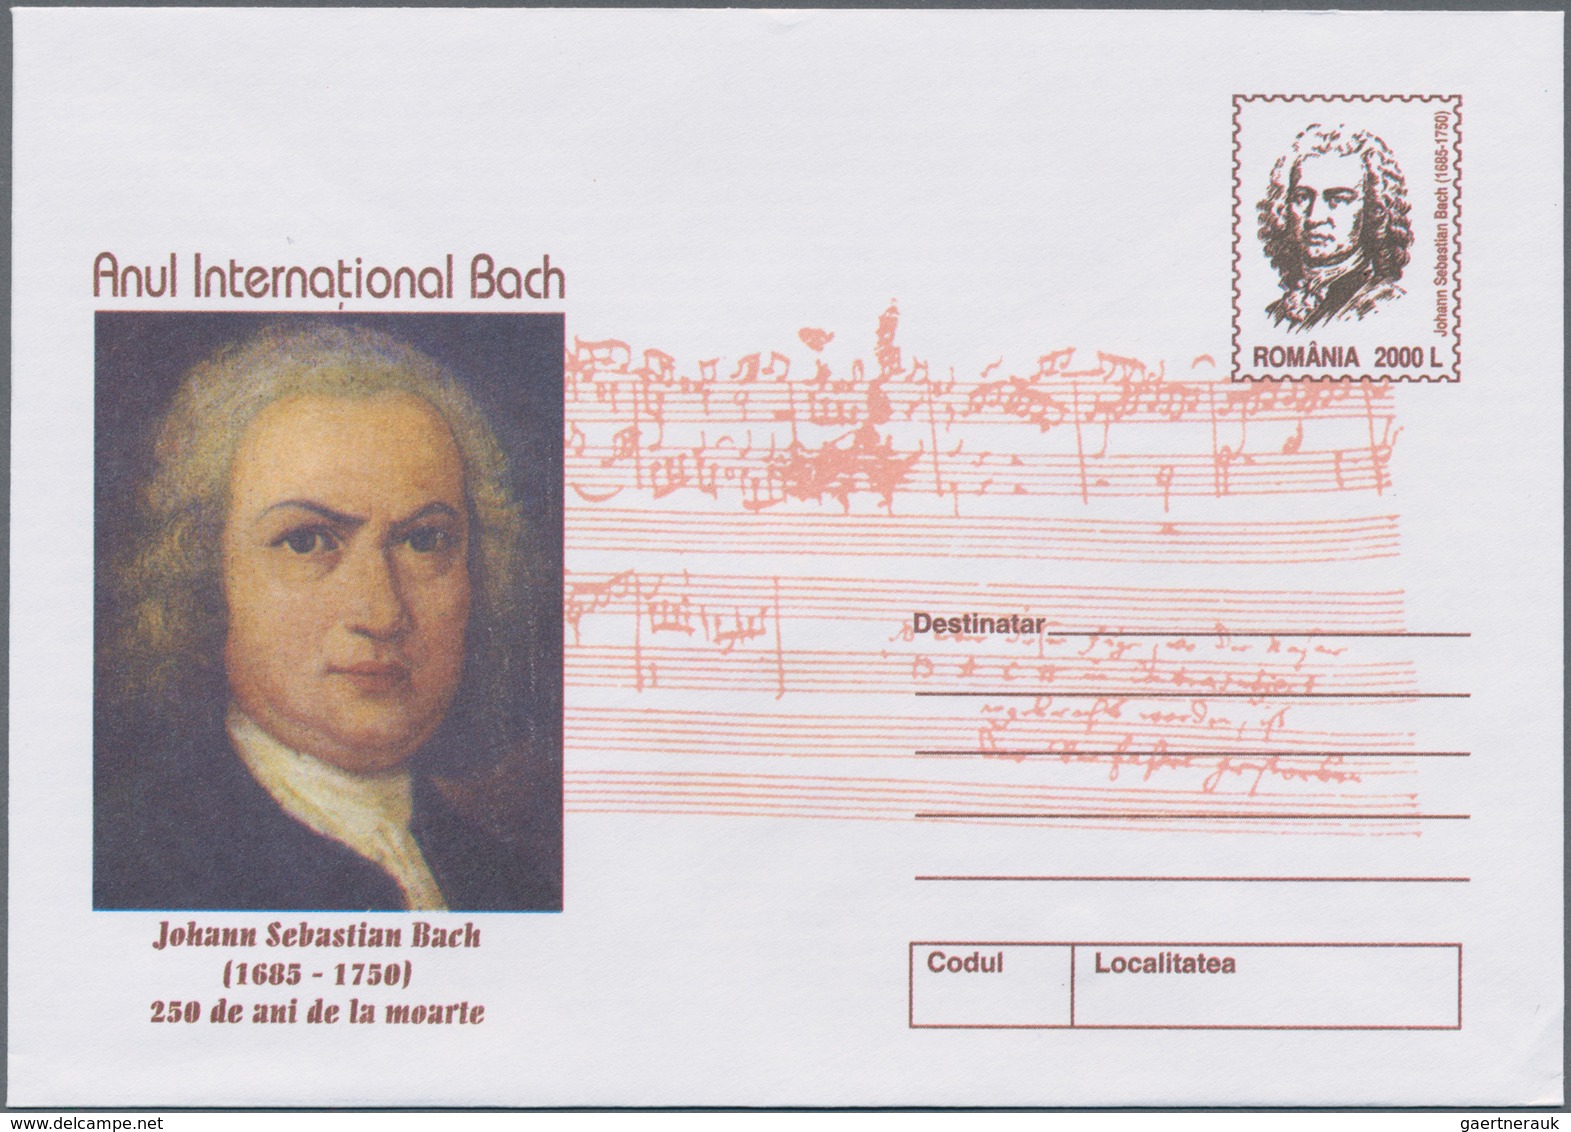 Rumänien - Ganzsachen: 2000 ca. 650 unused postal stationery cards and envelopes, mostly with specia